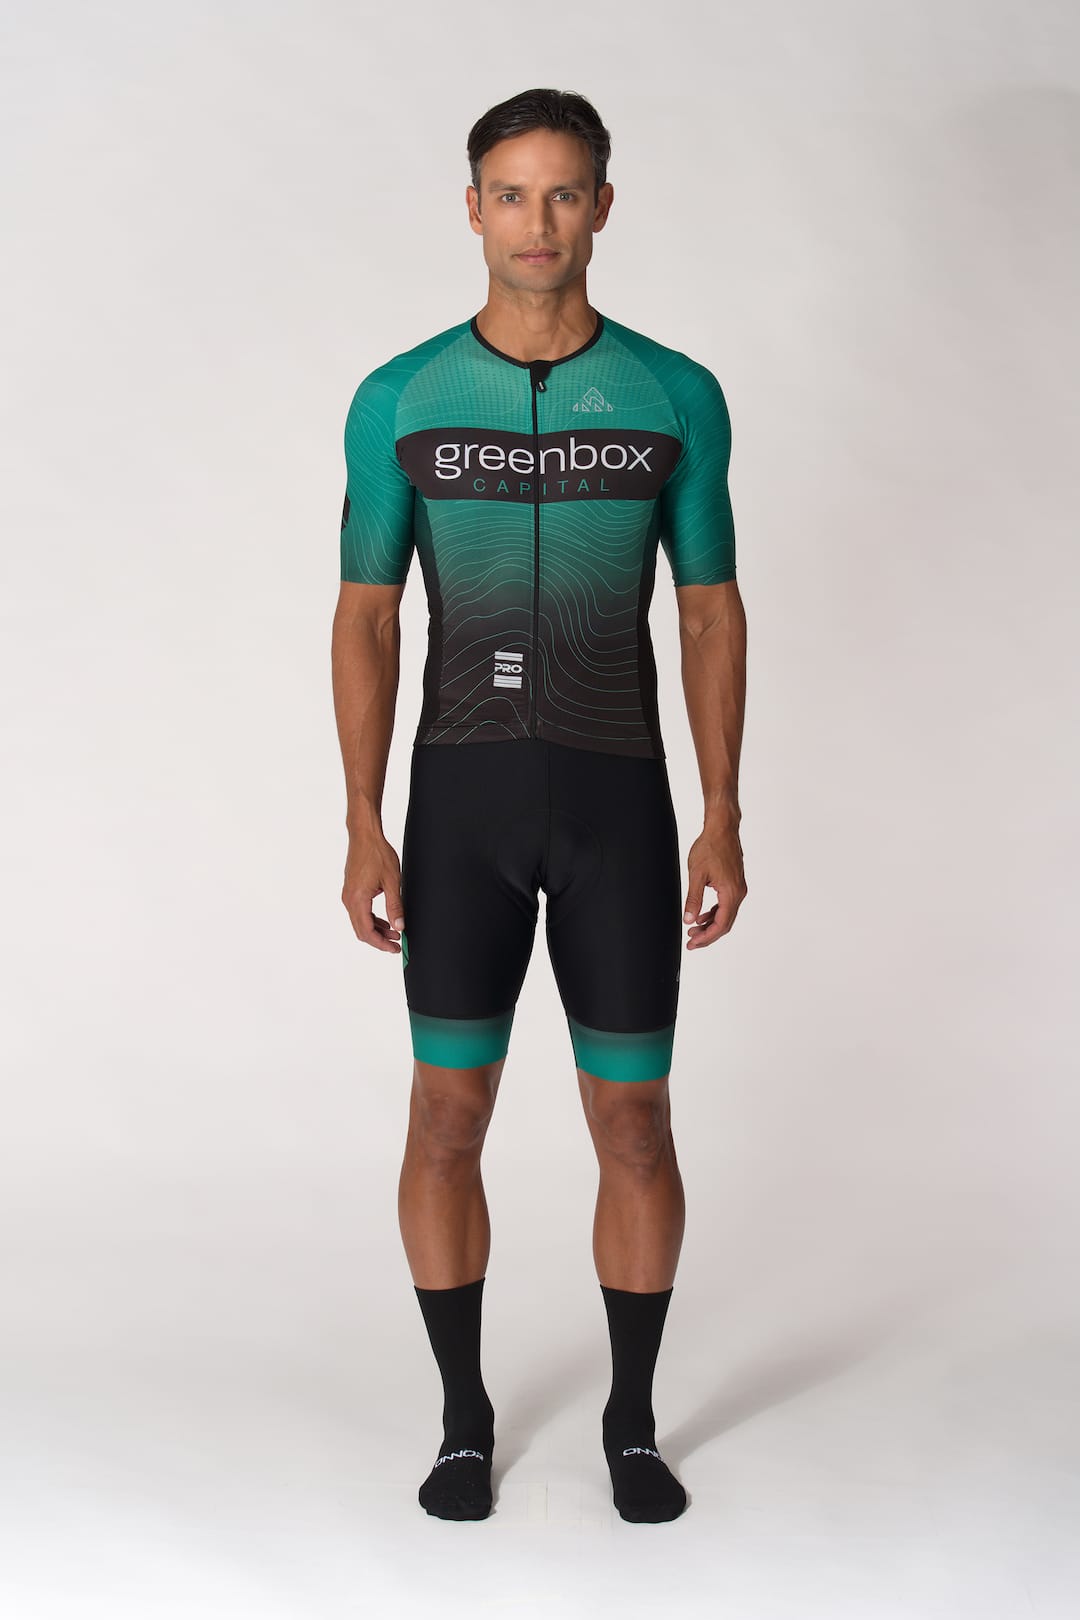 Personalized Cycling Apparel Miami